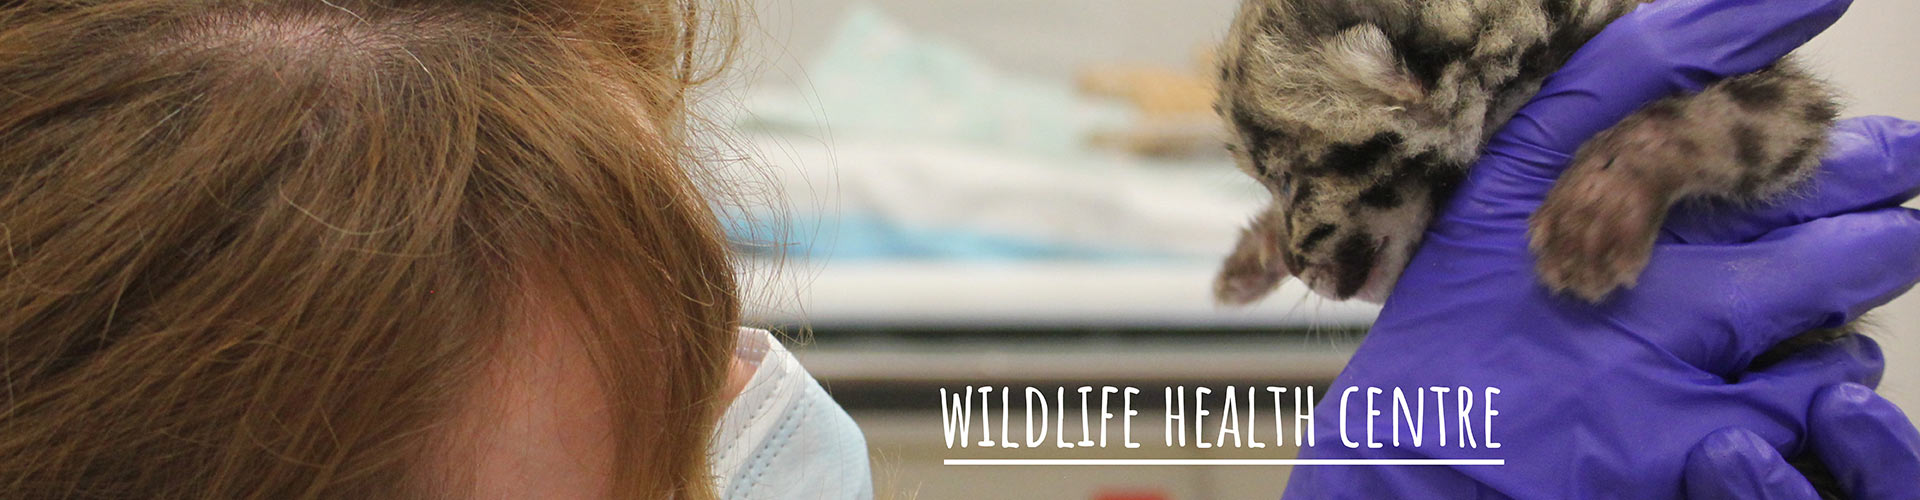 Wild Life Health Centre - Whats Inside